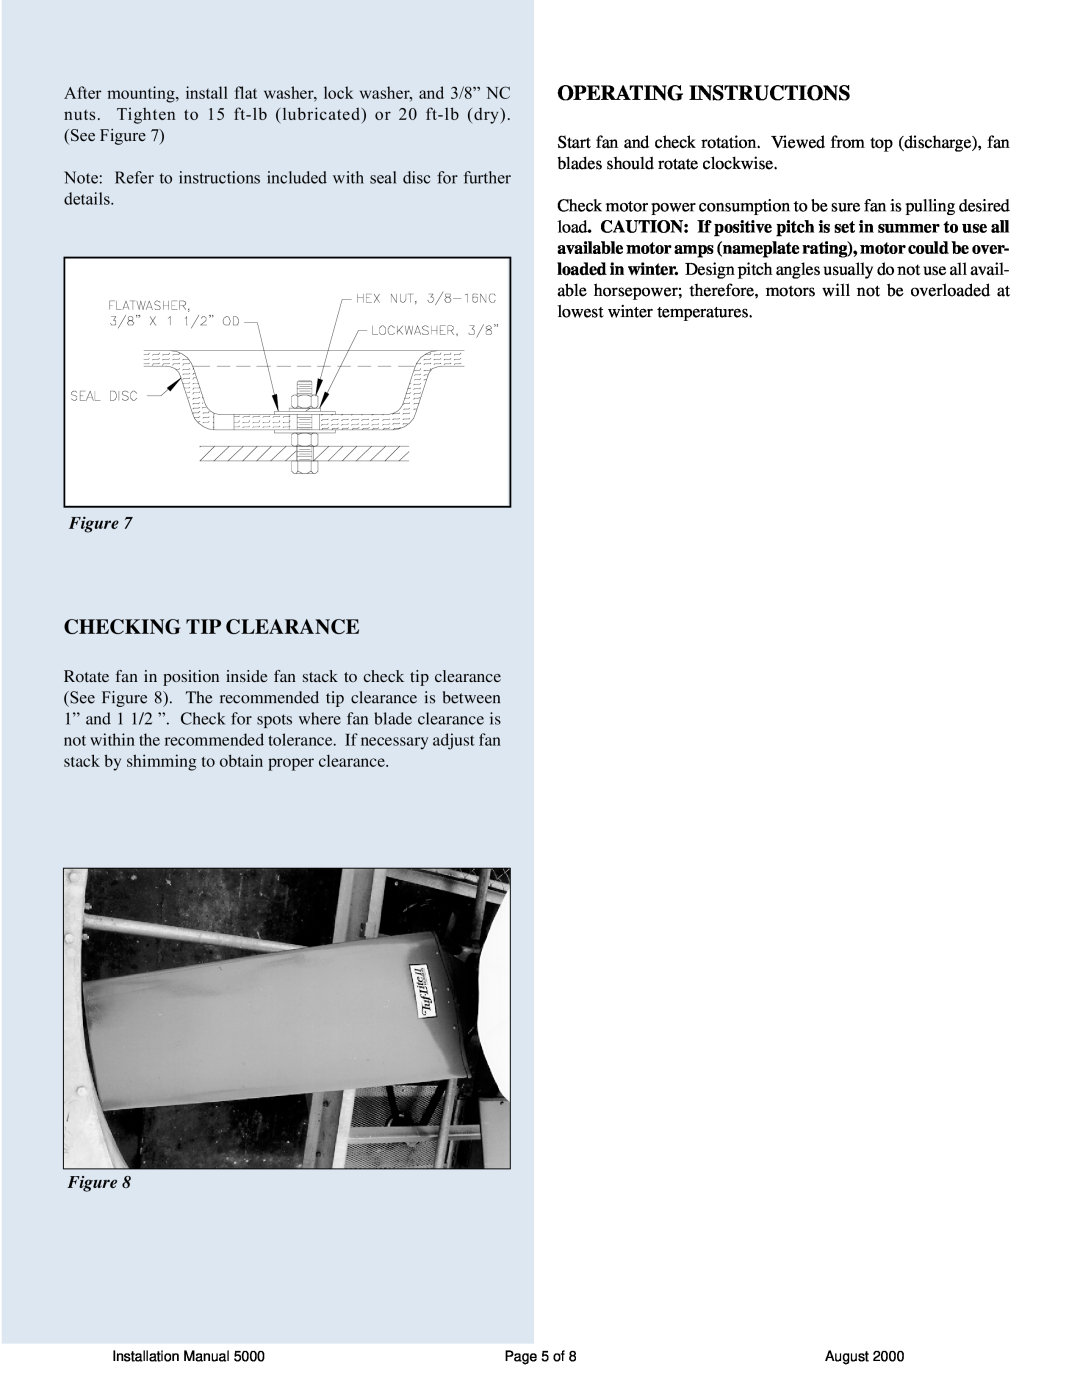 Hudson Sales & Engineering 5000 Series Checking Tip Clearance, Operating Instructions, Installation Manual, Page 5 of 